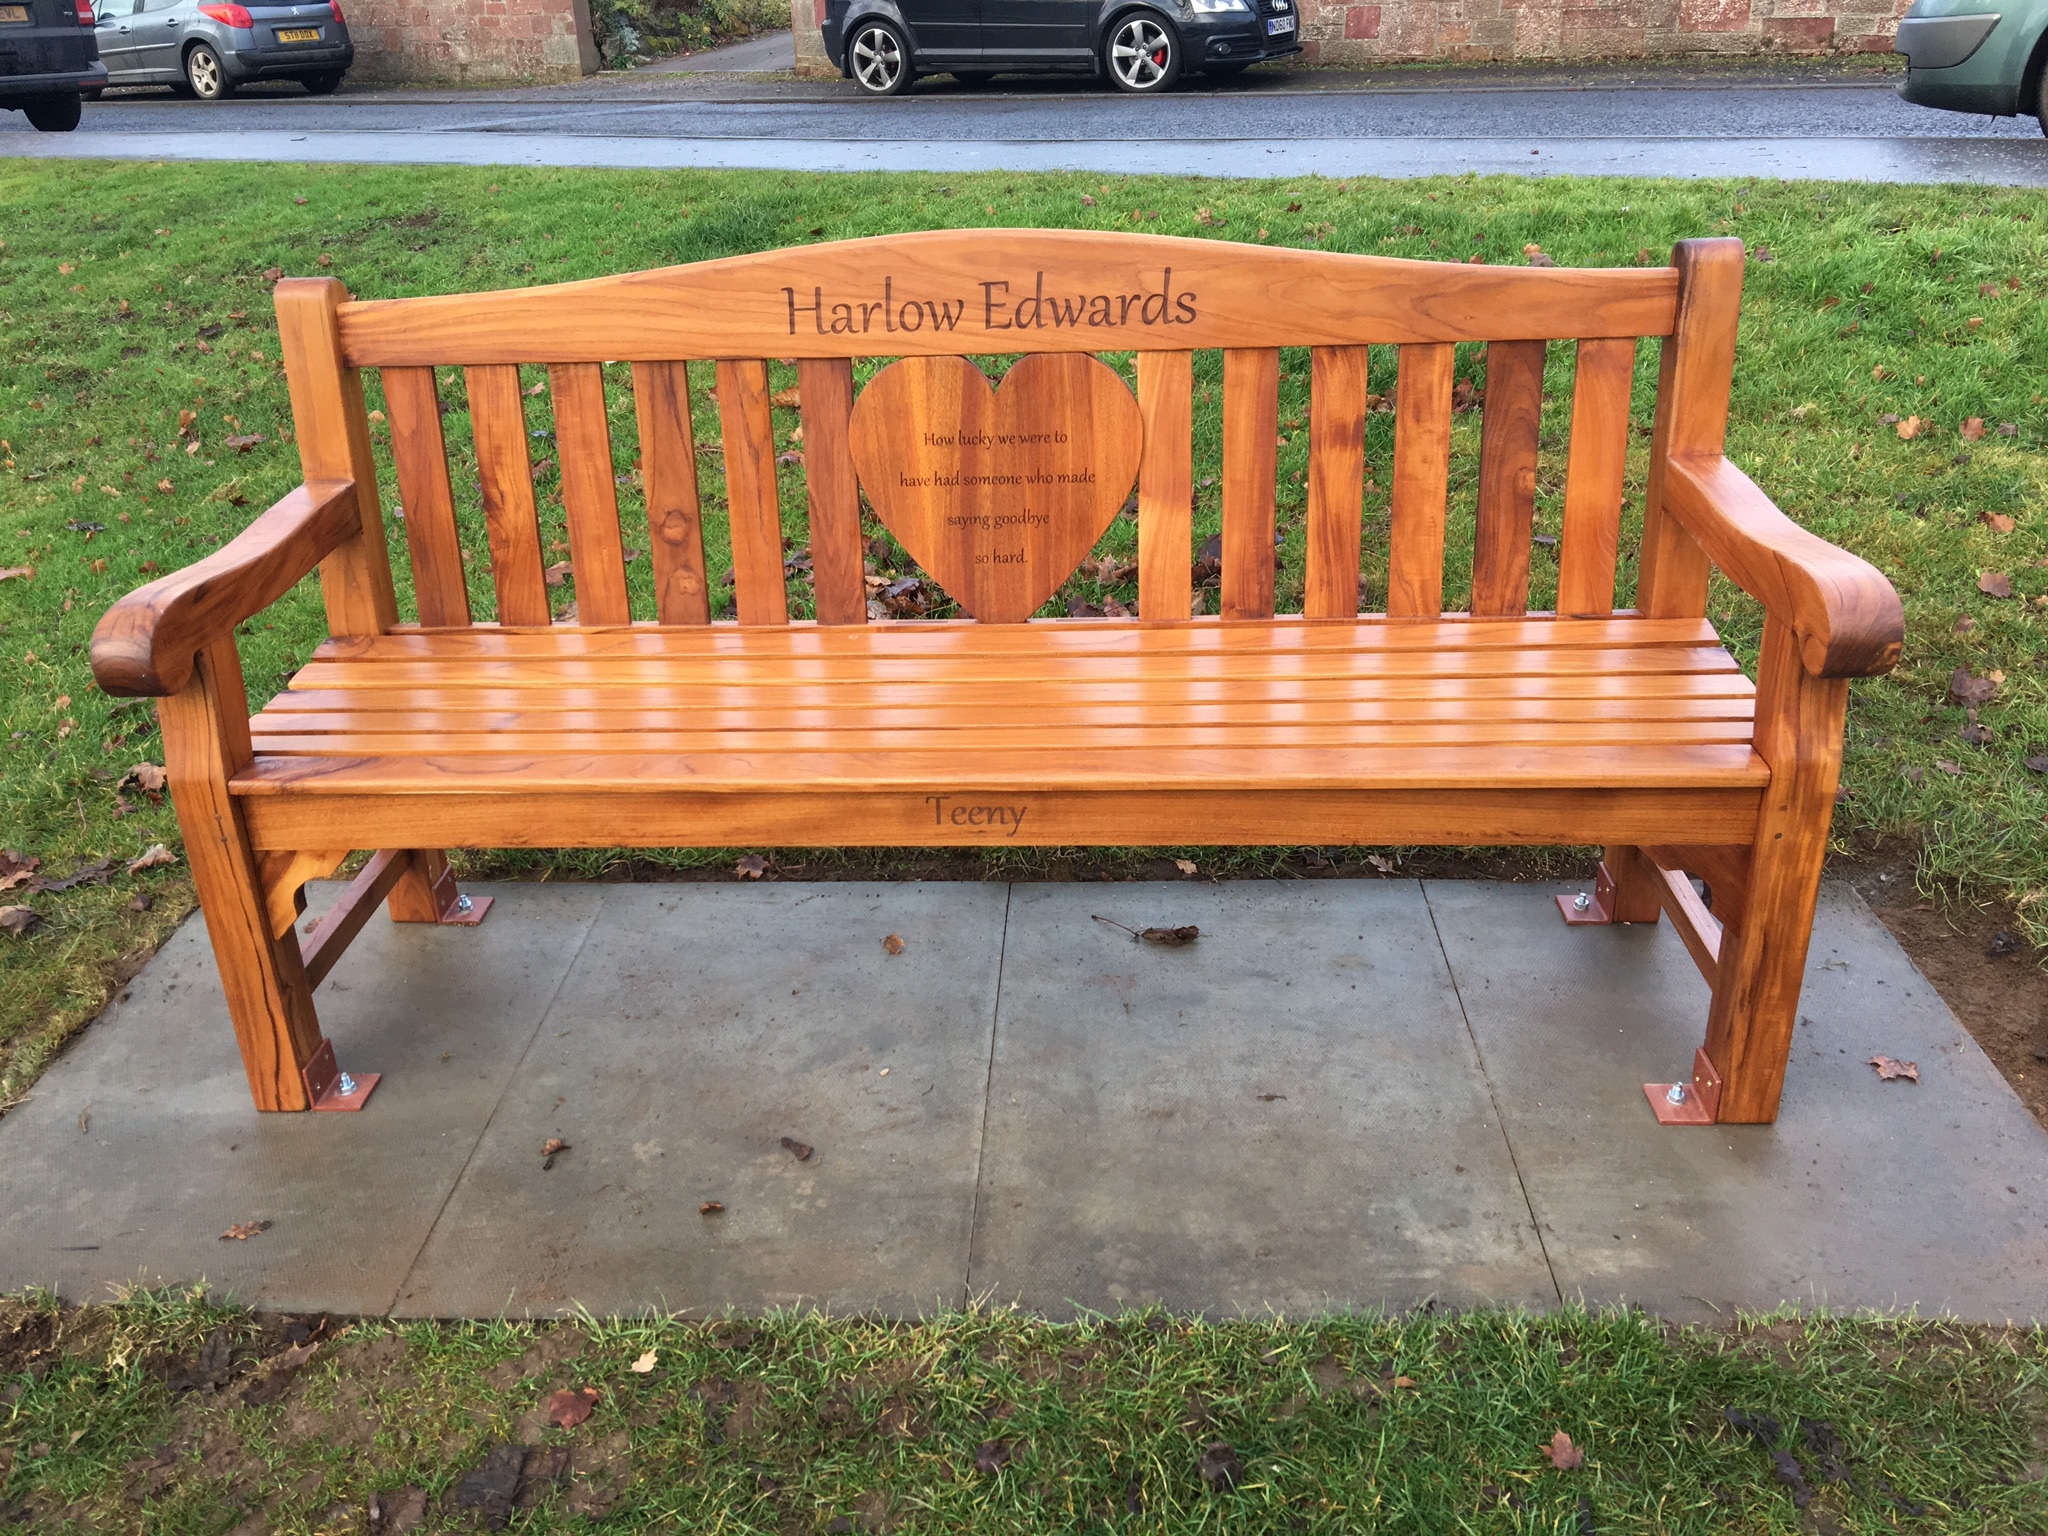 The memorial bench for Harlow Edwards which is located at the Common, Coupar Angus.